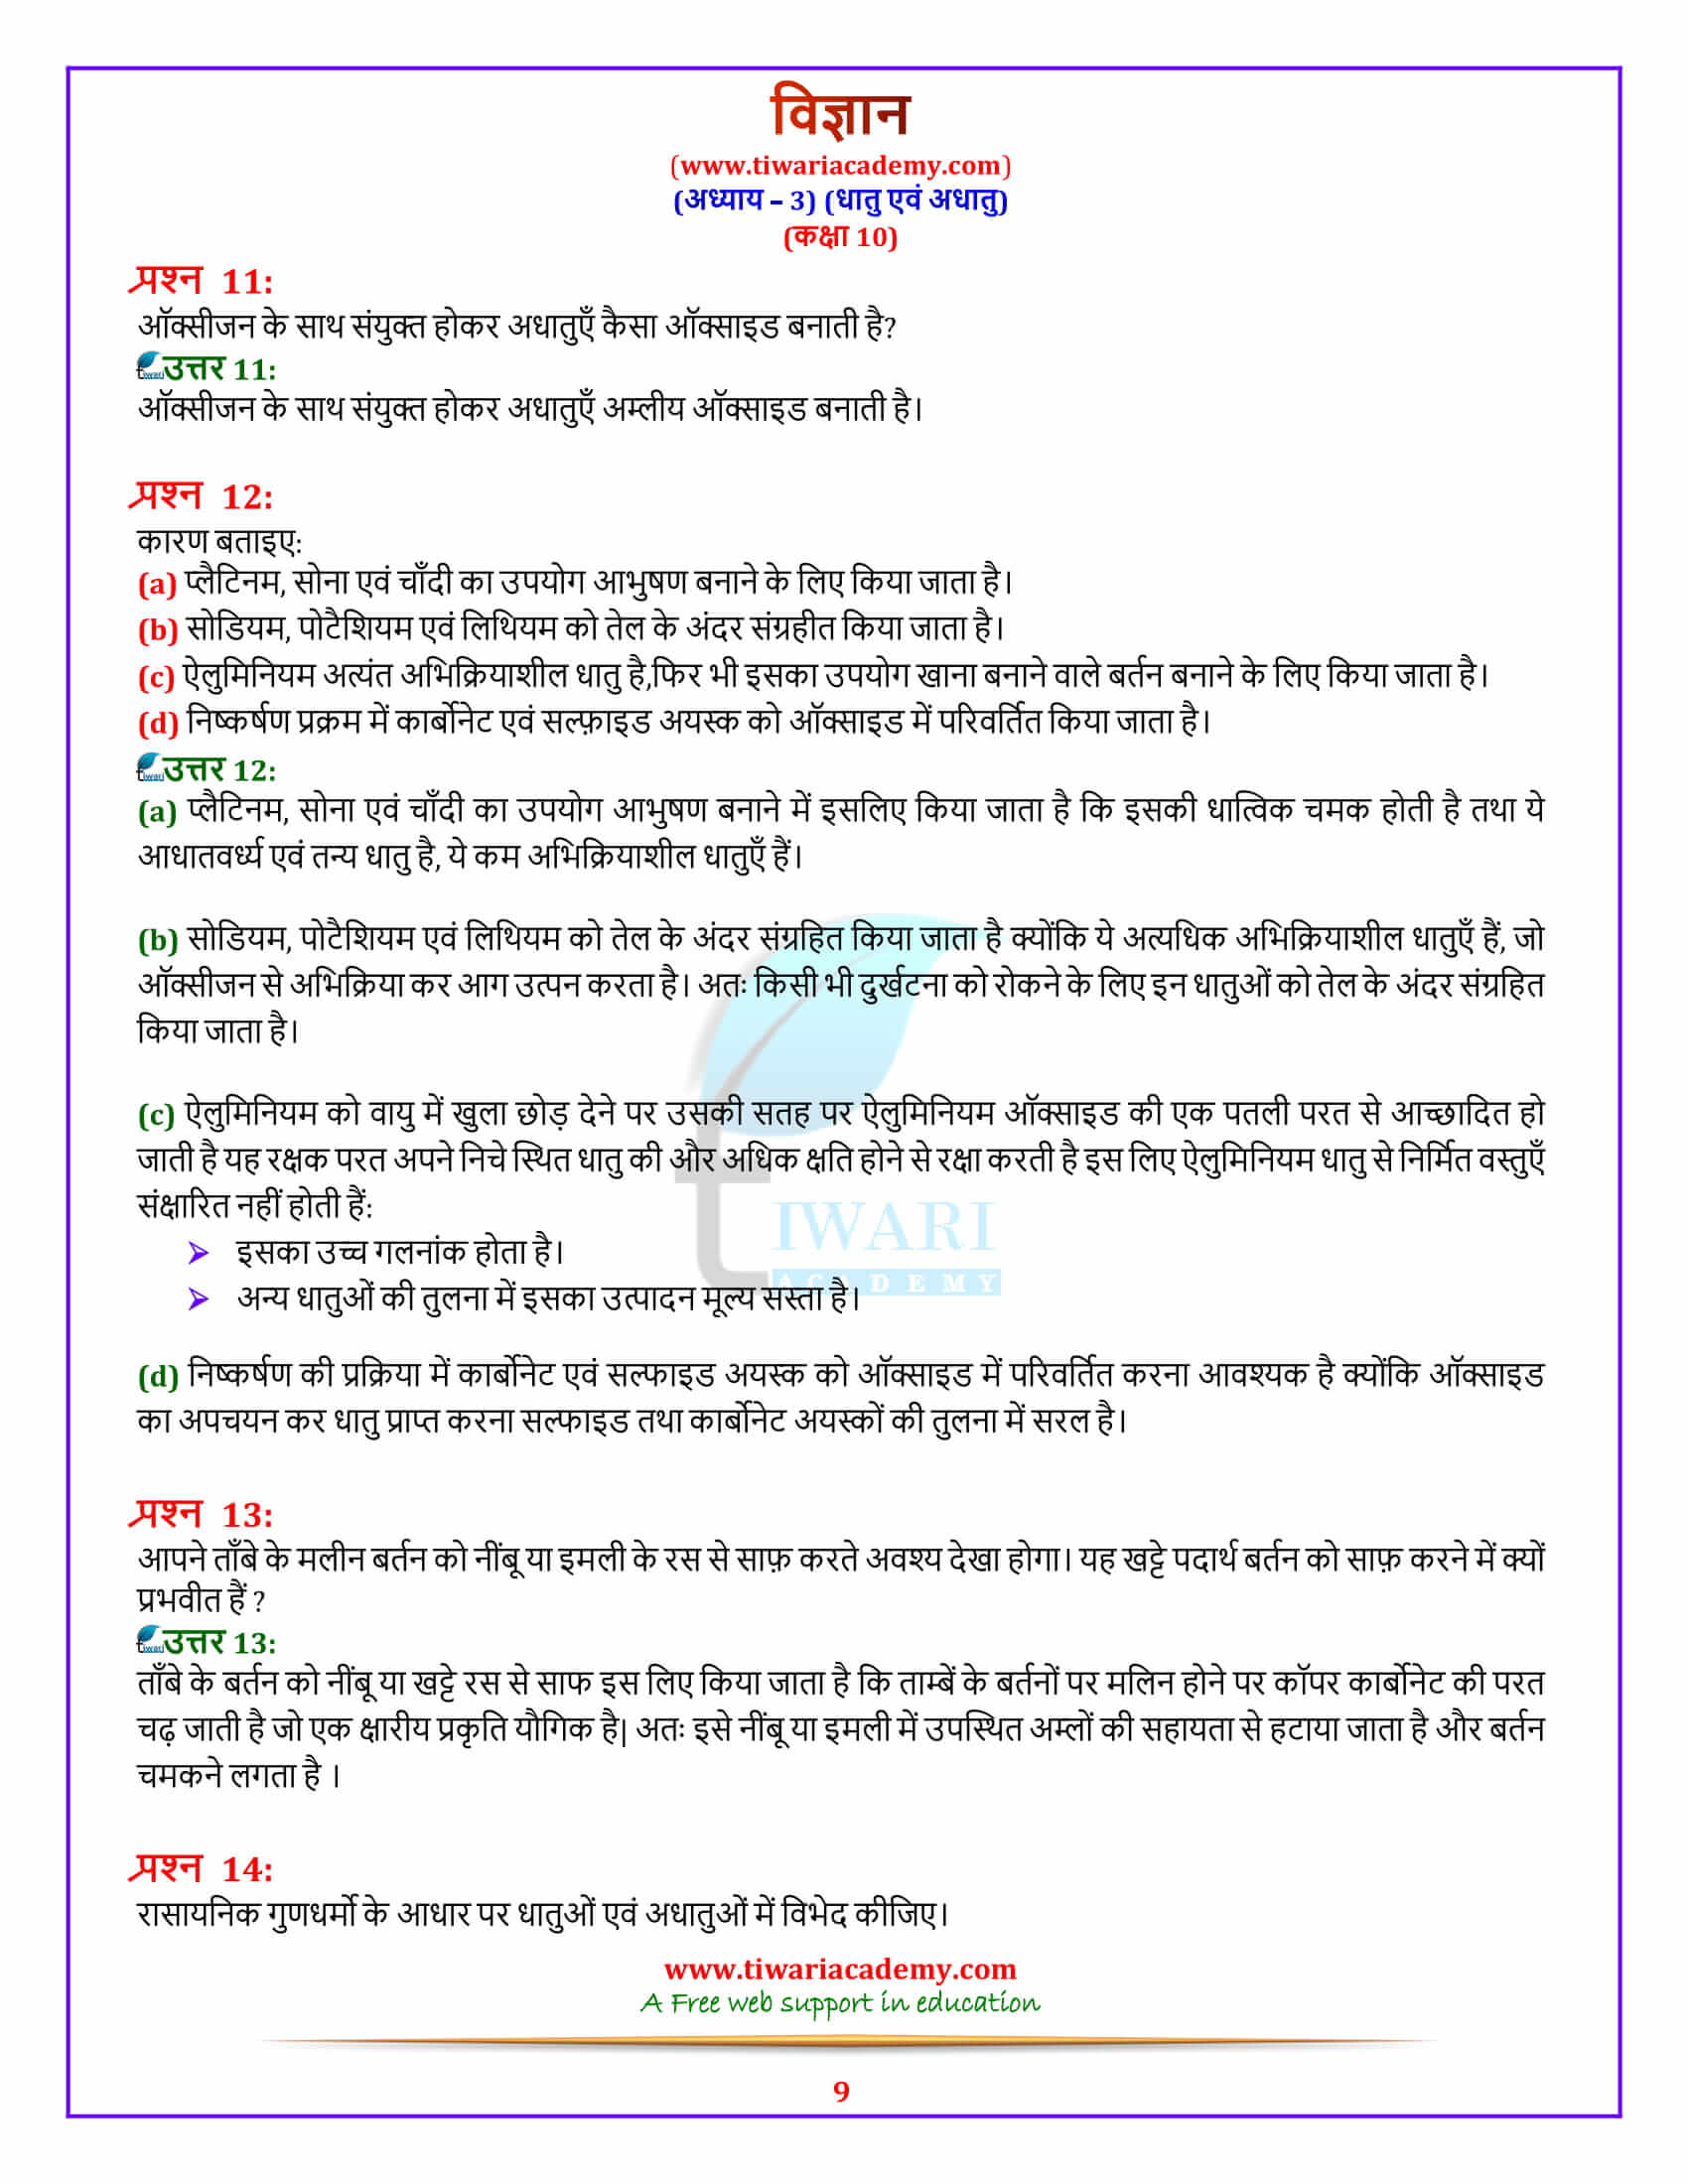 10 Science Chapter 3 Metals and Non-Metals free guide in hindi